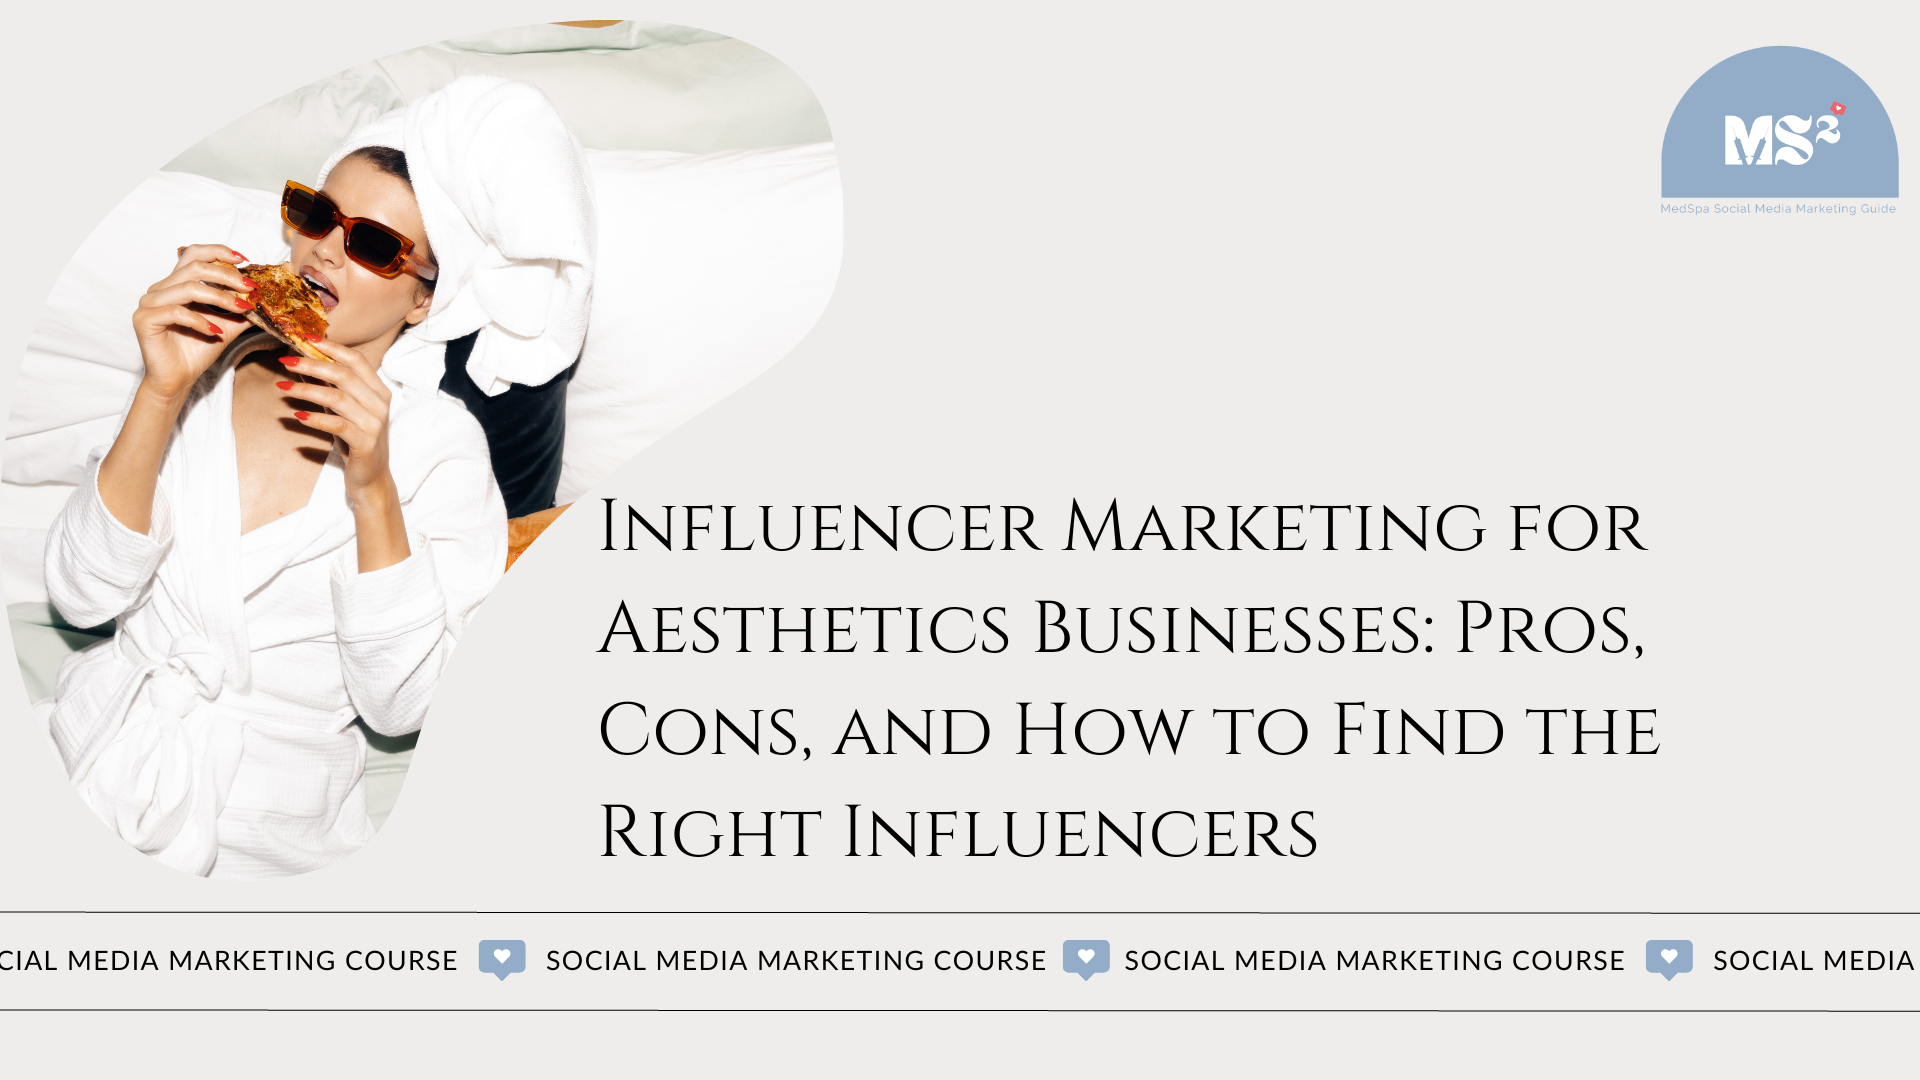 Influencer Marketing for Aesthetics Businesses: Pros, Cons, and How to Find the Right Influencers